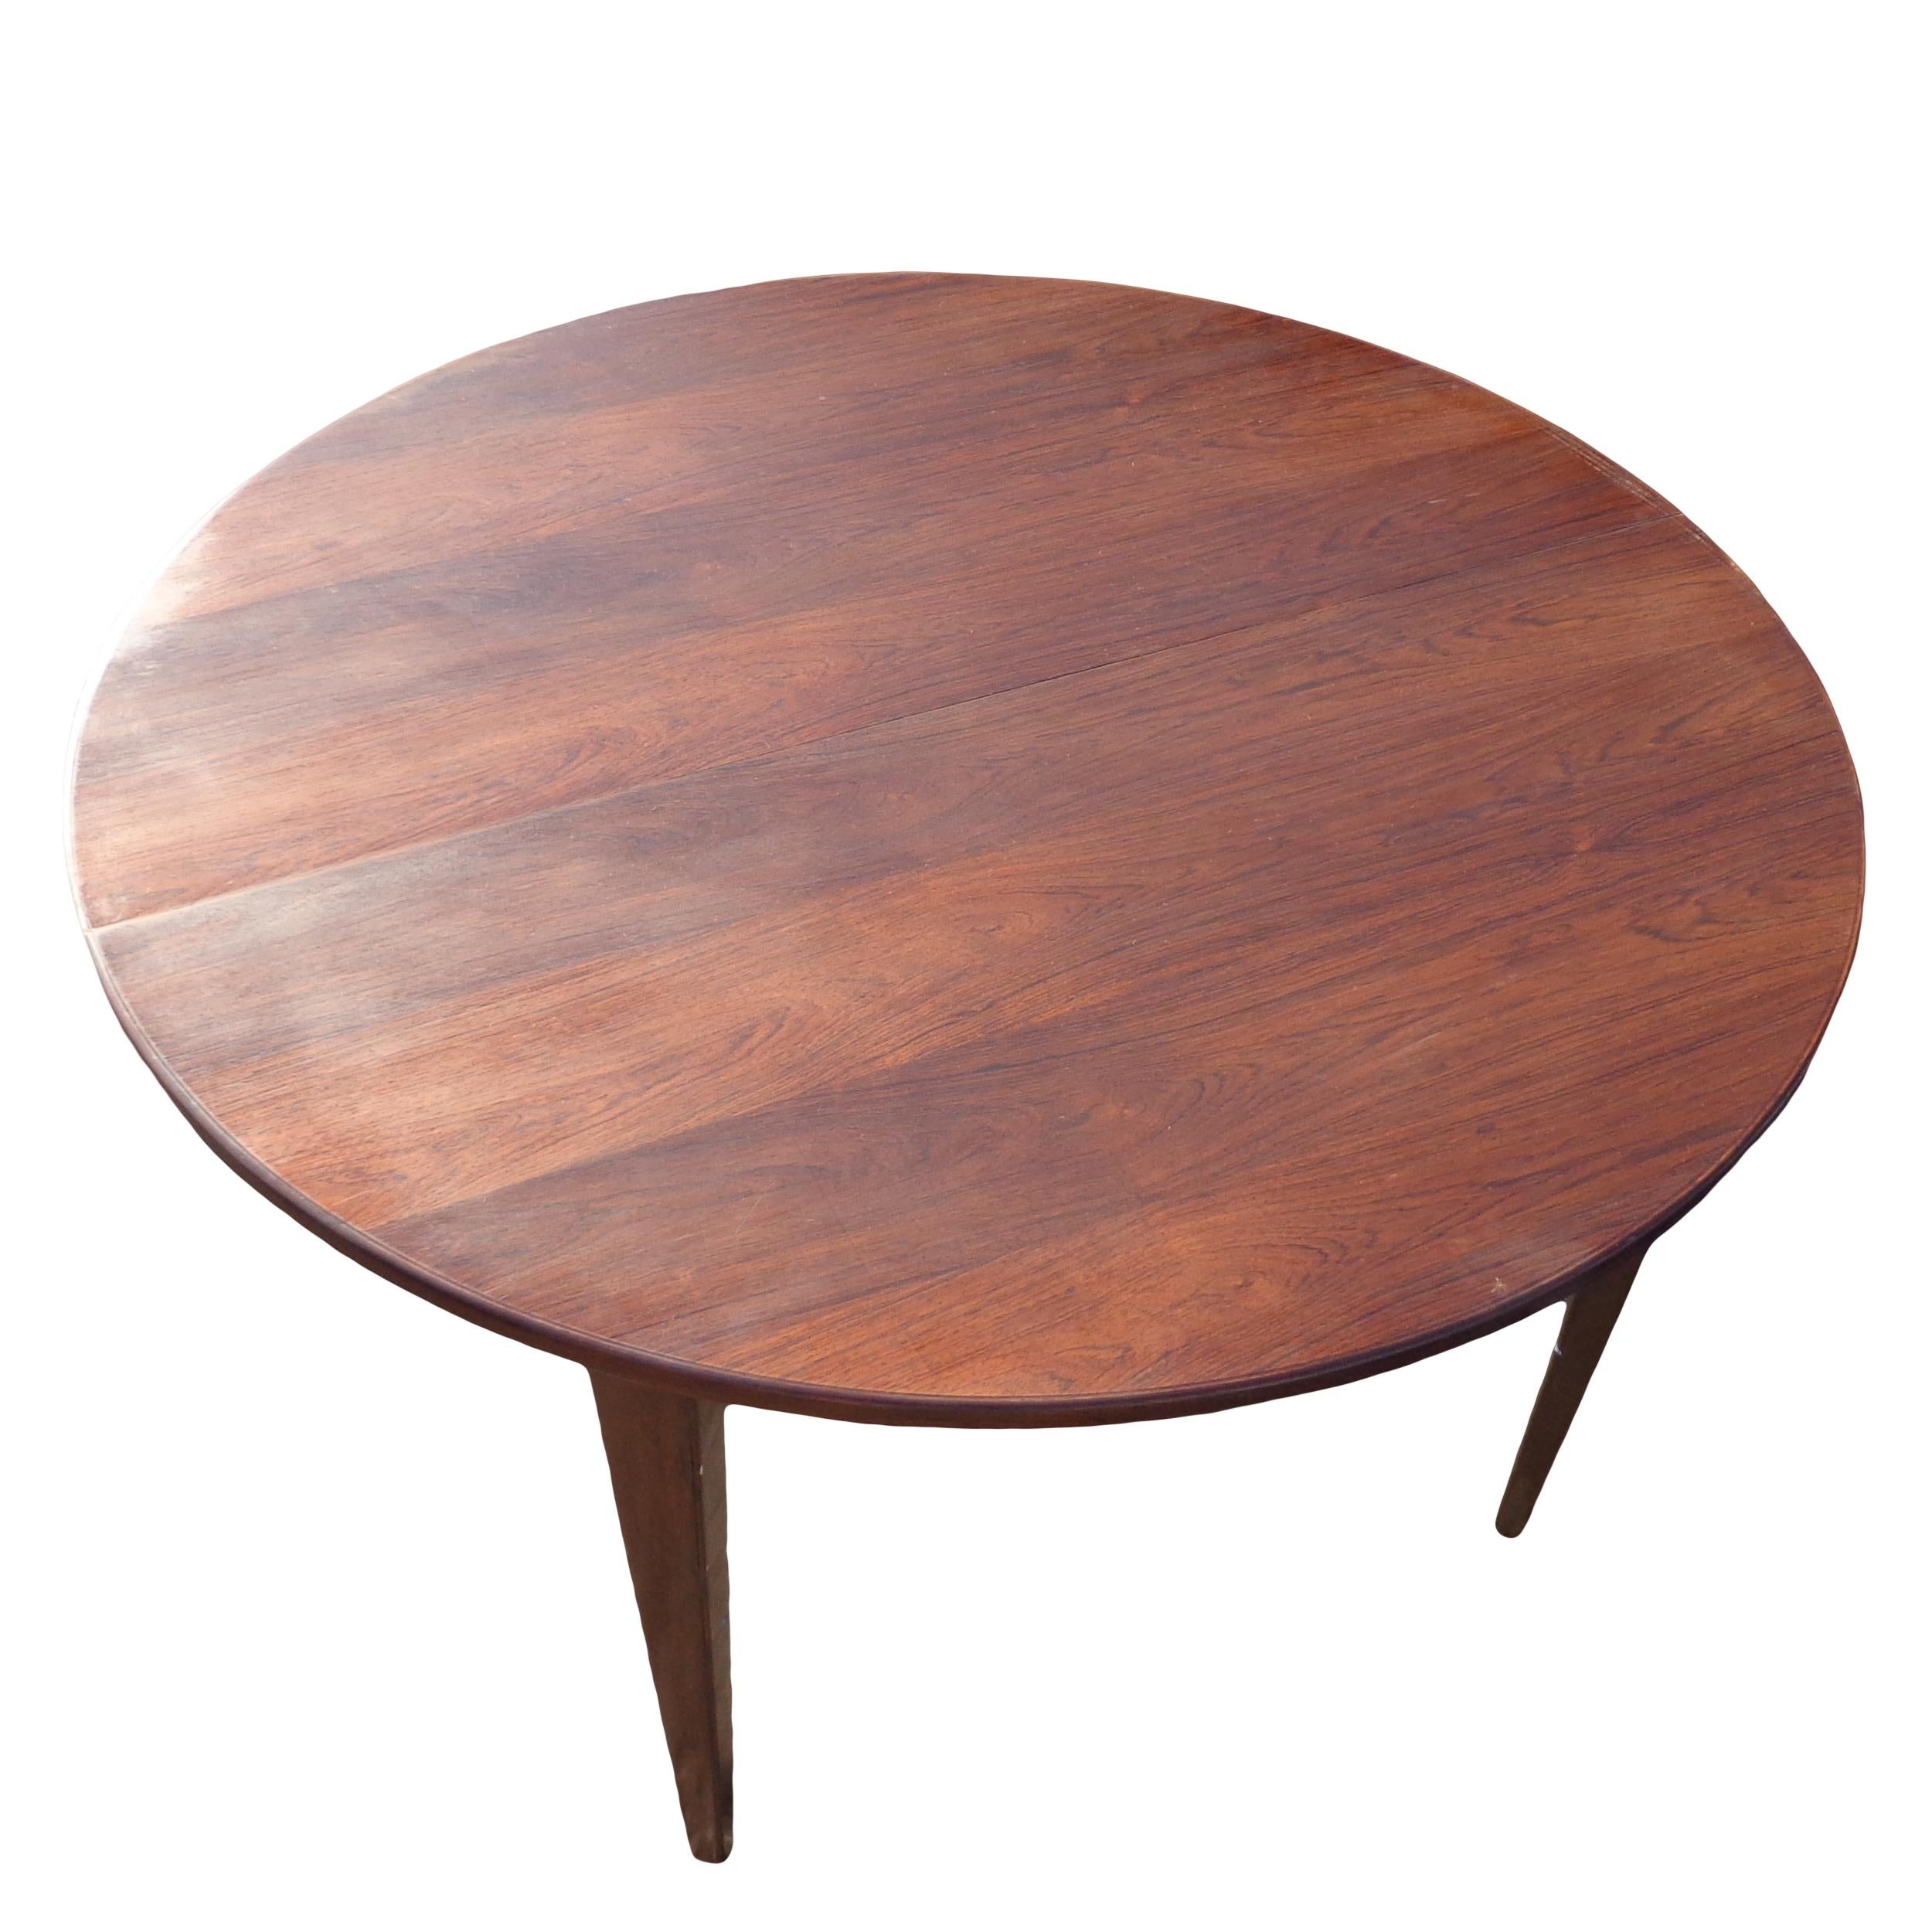 Danish rosewood round dining table

Attributed to Hans Olsen this round table measures 47.25? in diameter and has a rich rosewood grain.
 